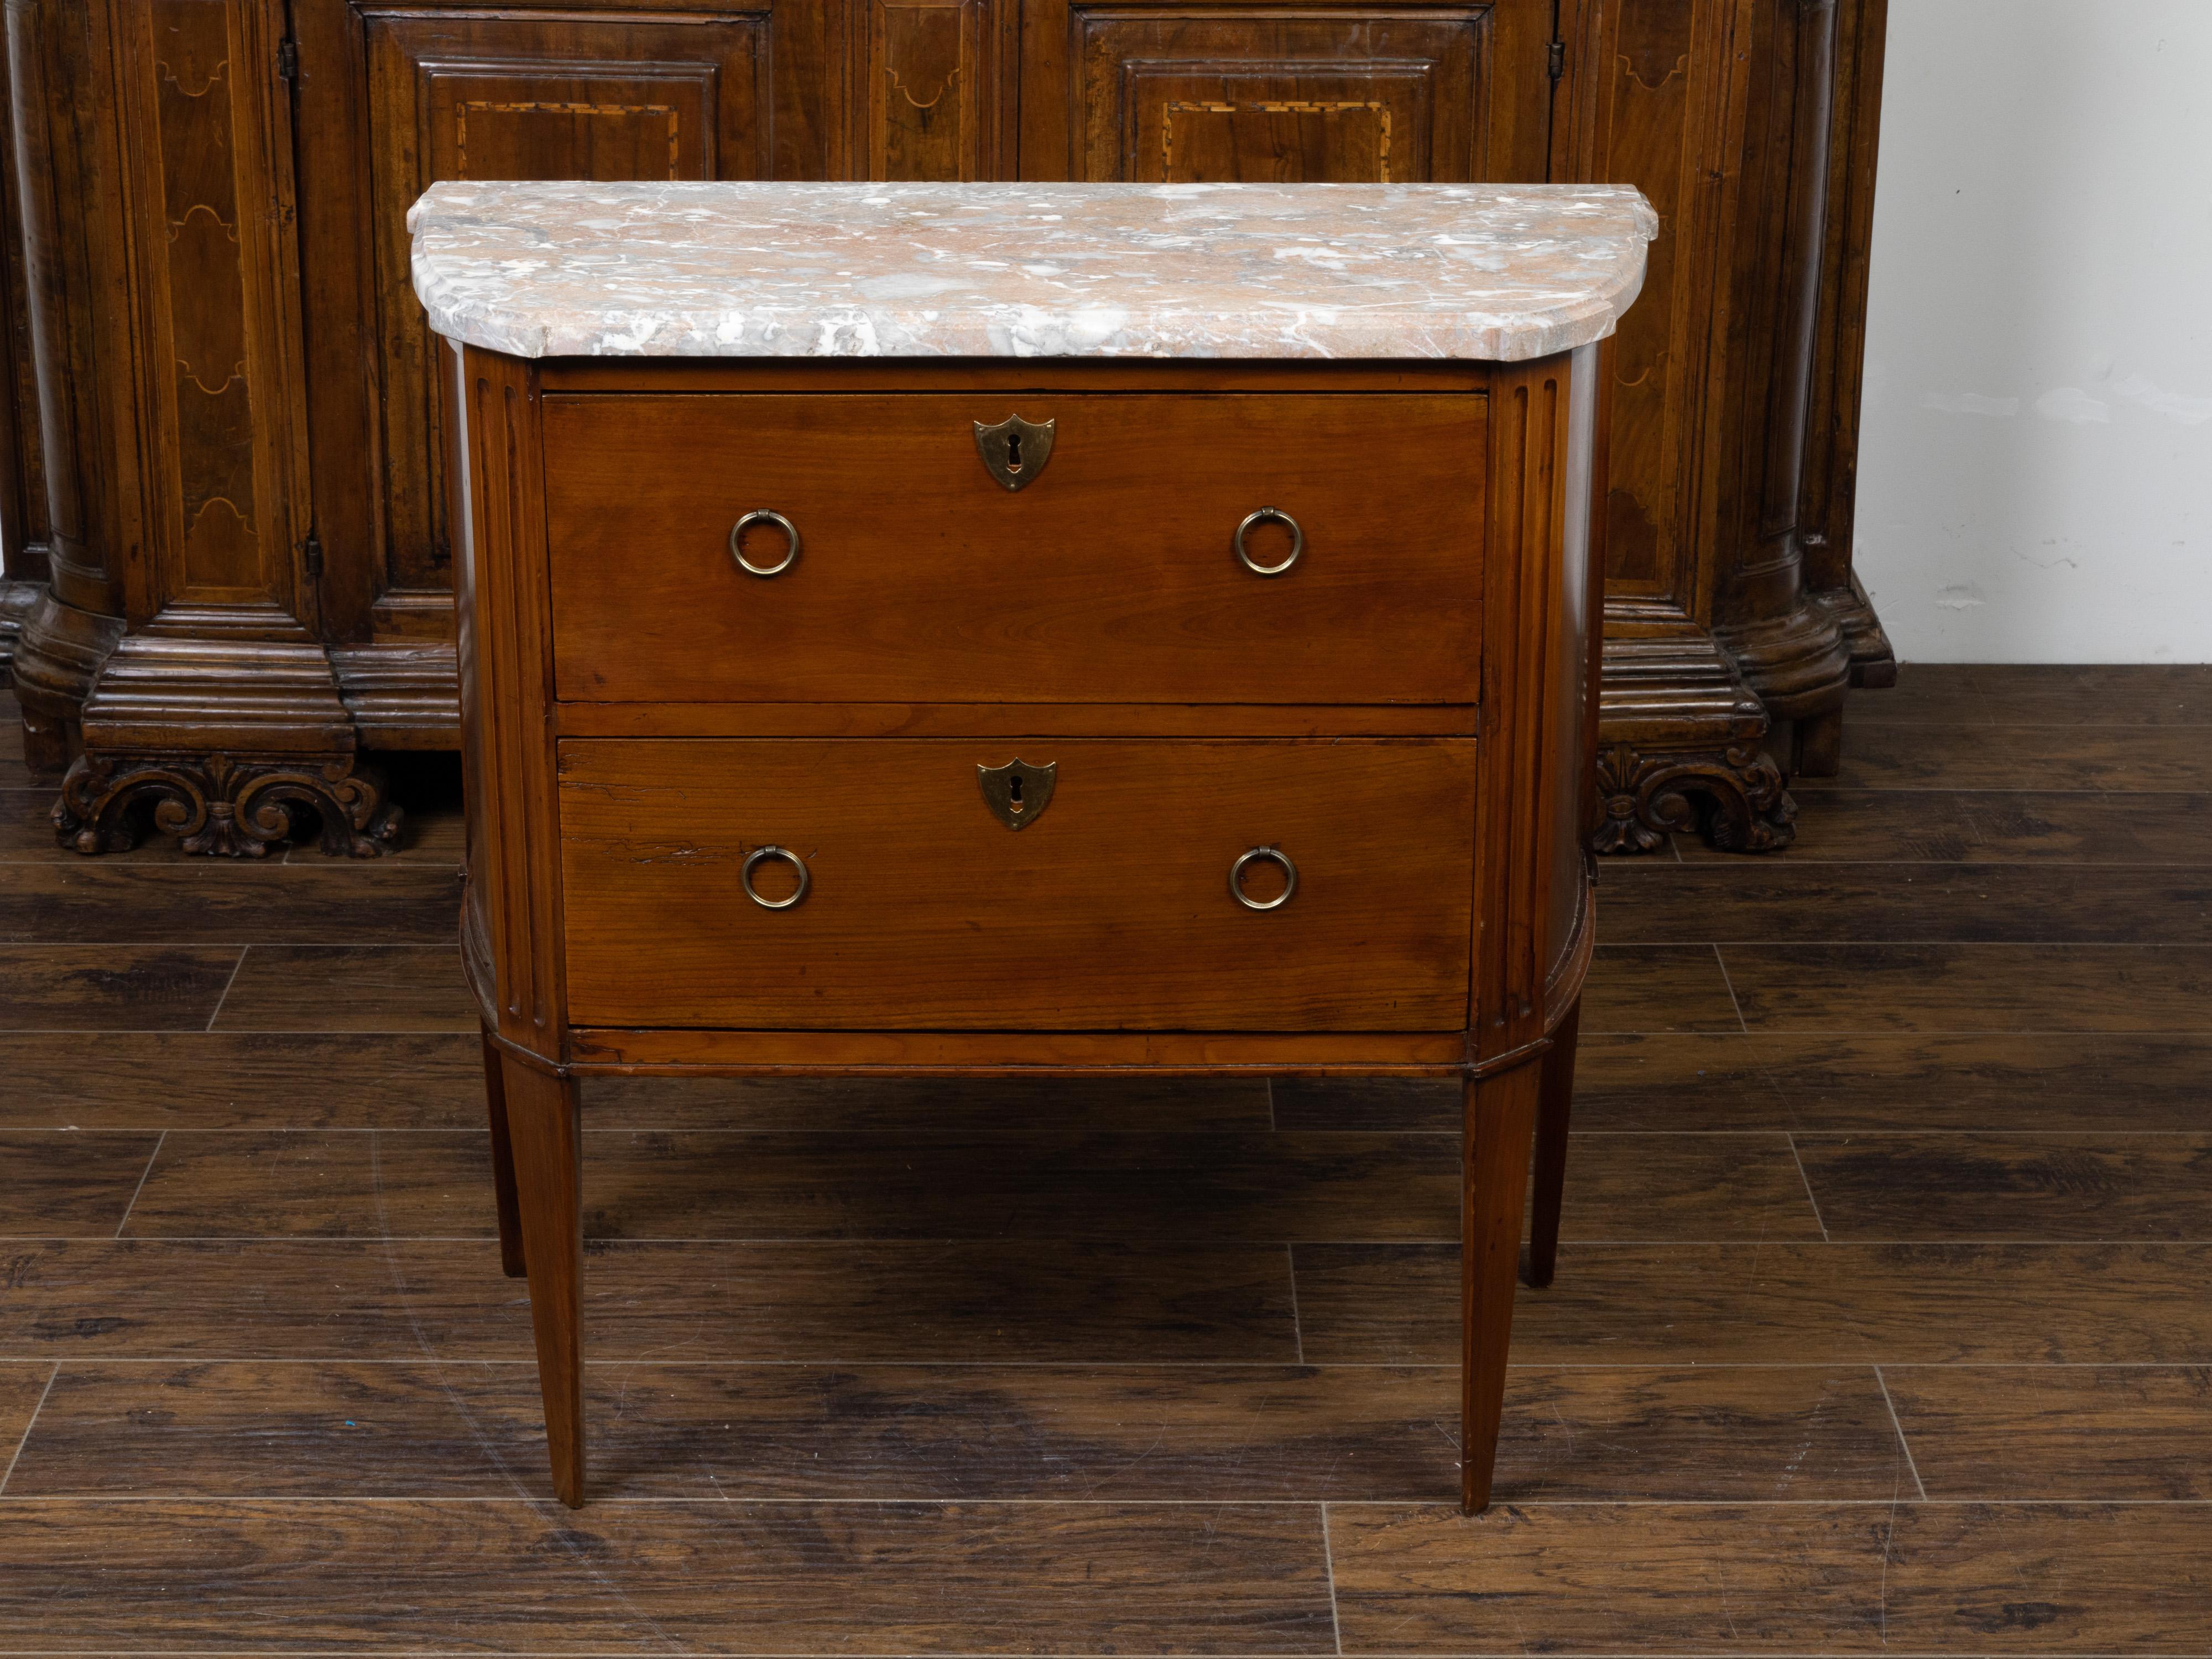 A French walnut commode from the 19th century, with variegated marble top and two drawers. Created in France during the 19th century, this walnut commode features a variegated marble top with protruding corners, sitting above two drawers fitted with